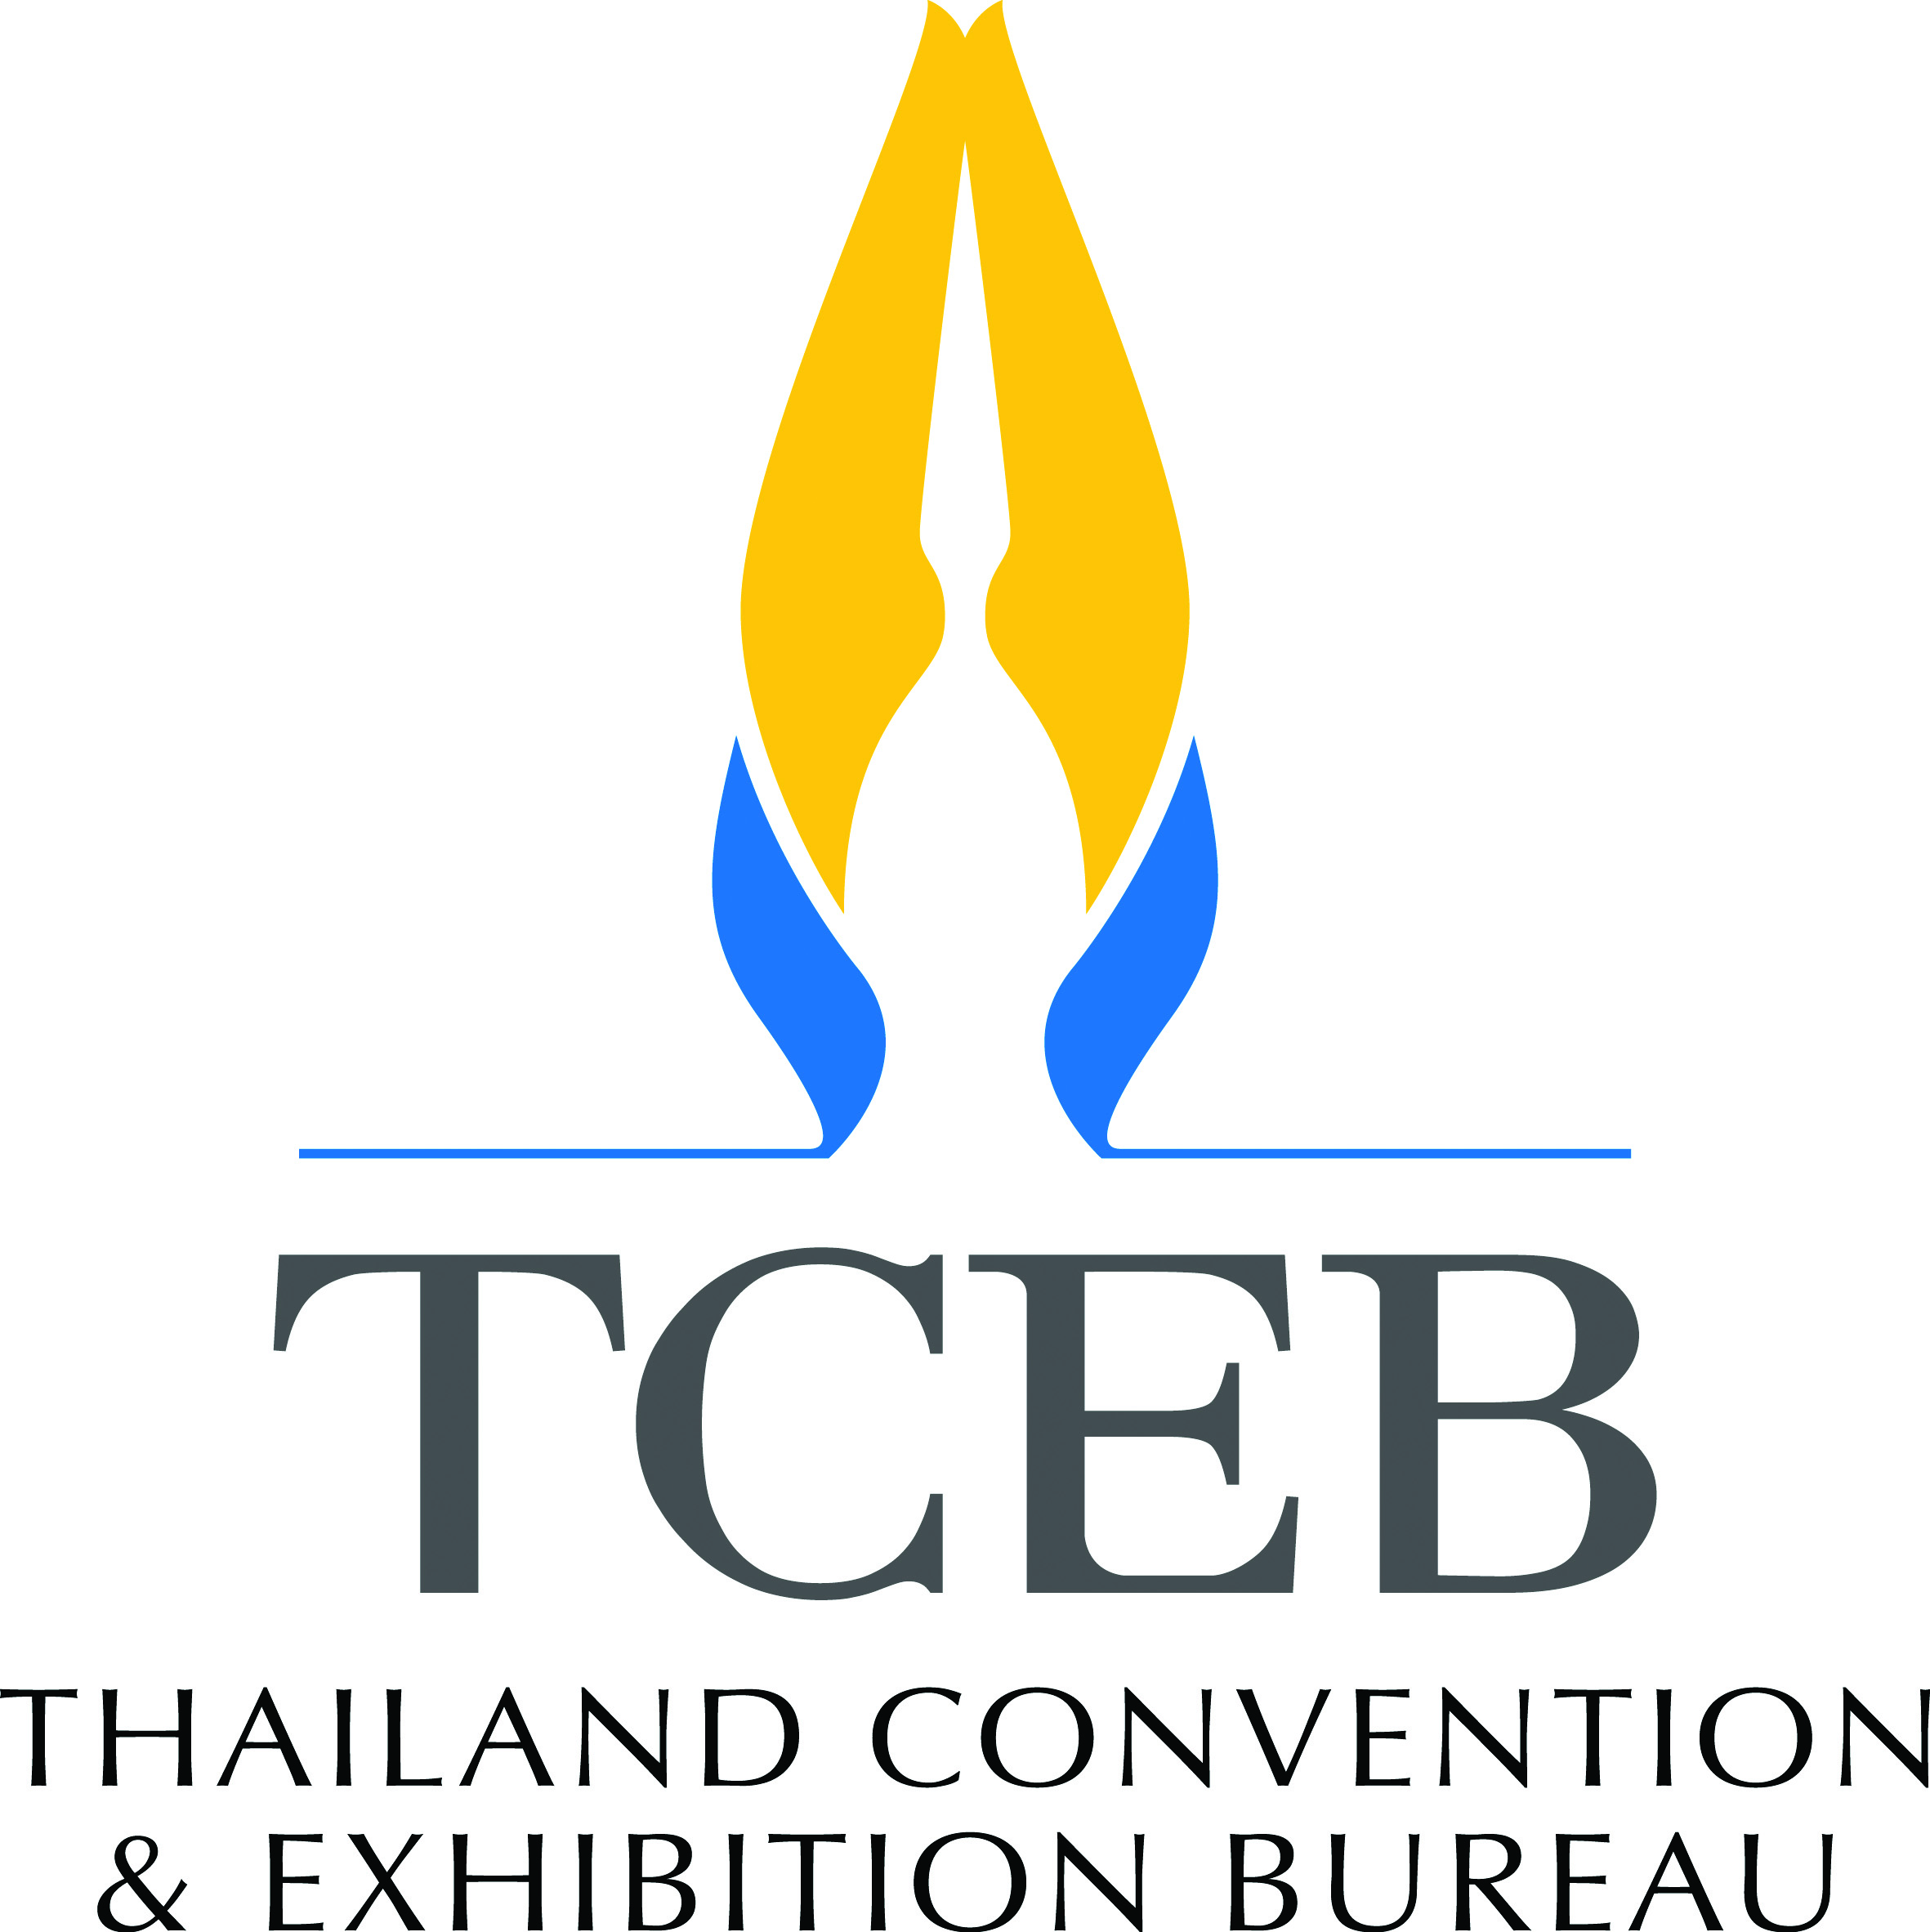 Are You Ready to Reconnect and Regain Business Momentum in Thailand?